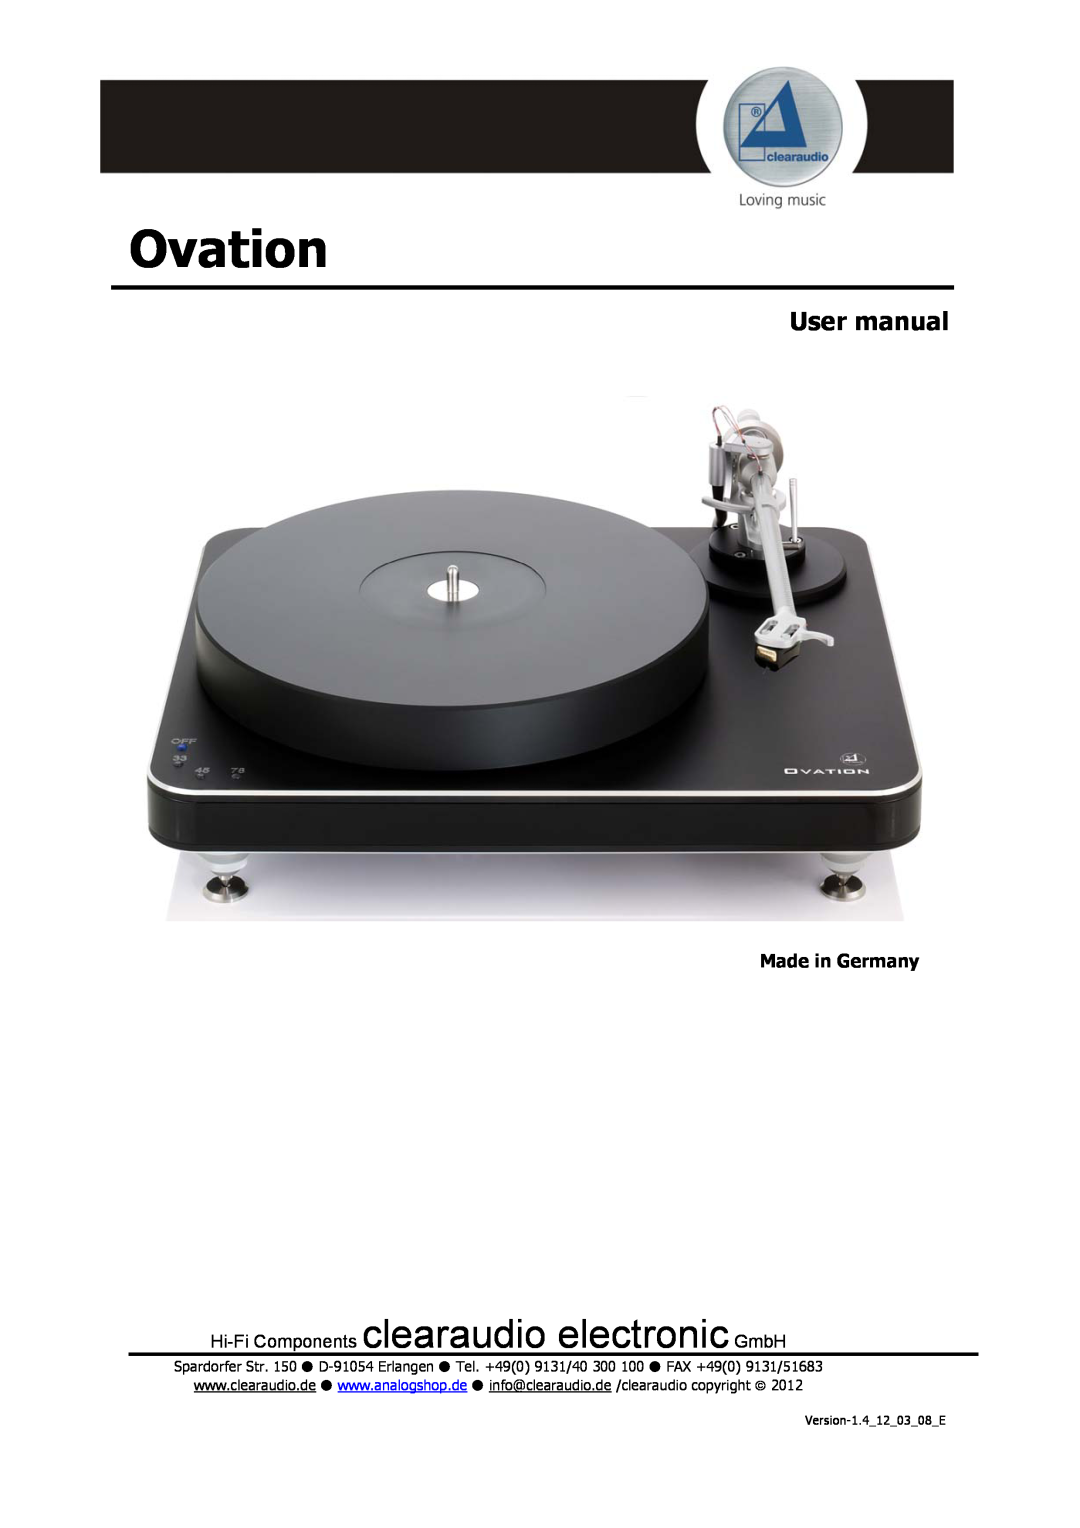 Clearaudio Version-1.4_12_03_08_E user manual Ovation, Hi-FiComponents clearaudio electronic GmbH, Made in Germany 